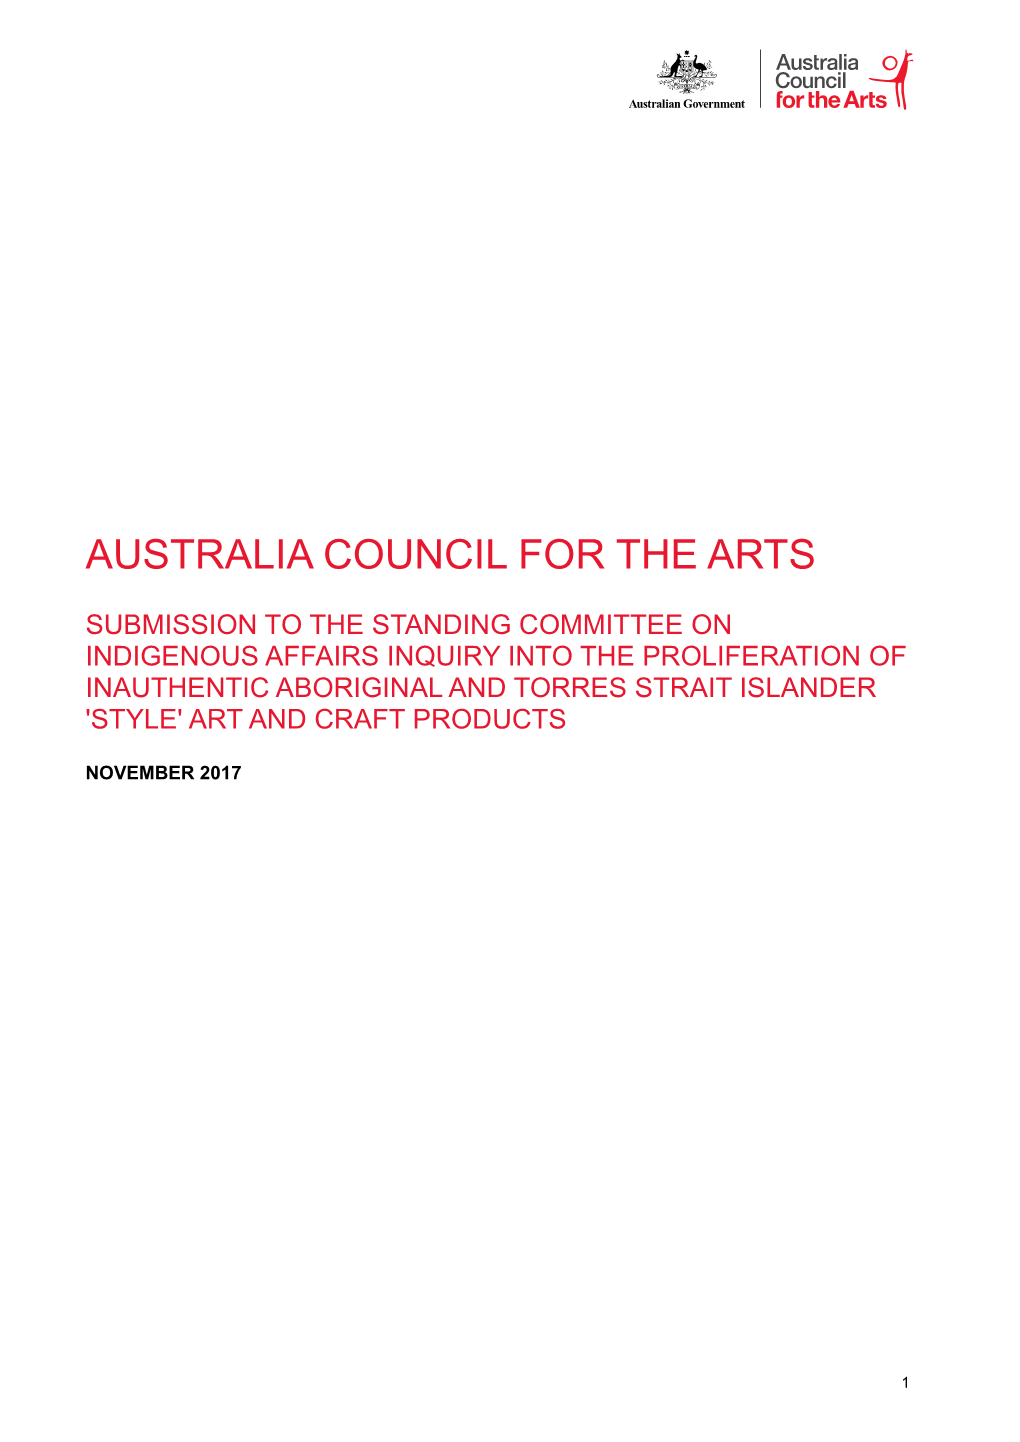 Australia Council Submission to the Standing Committee on Indigenous